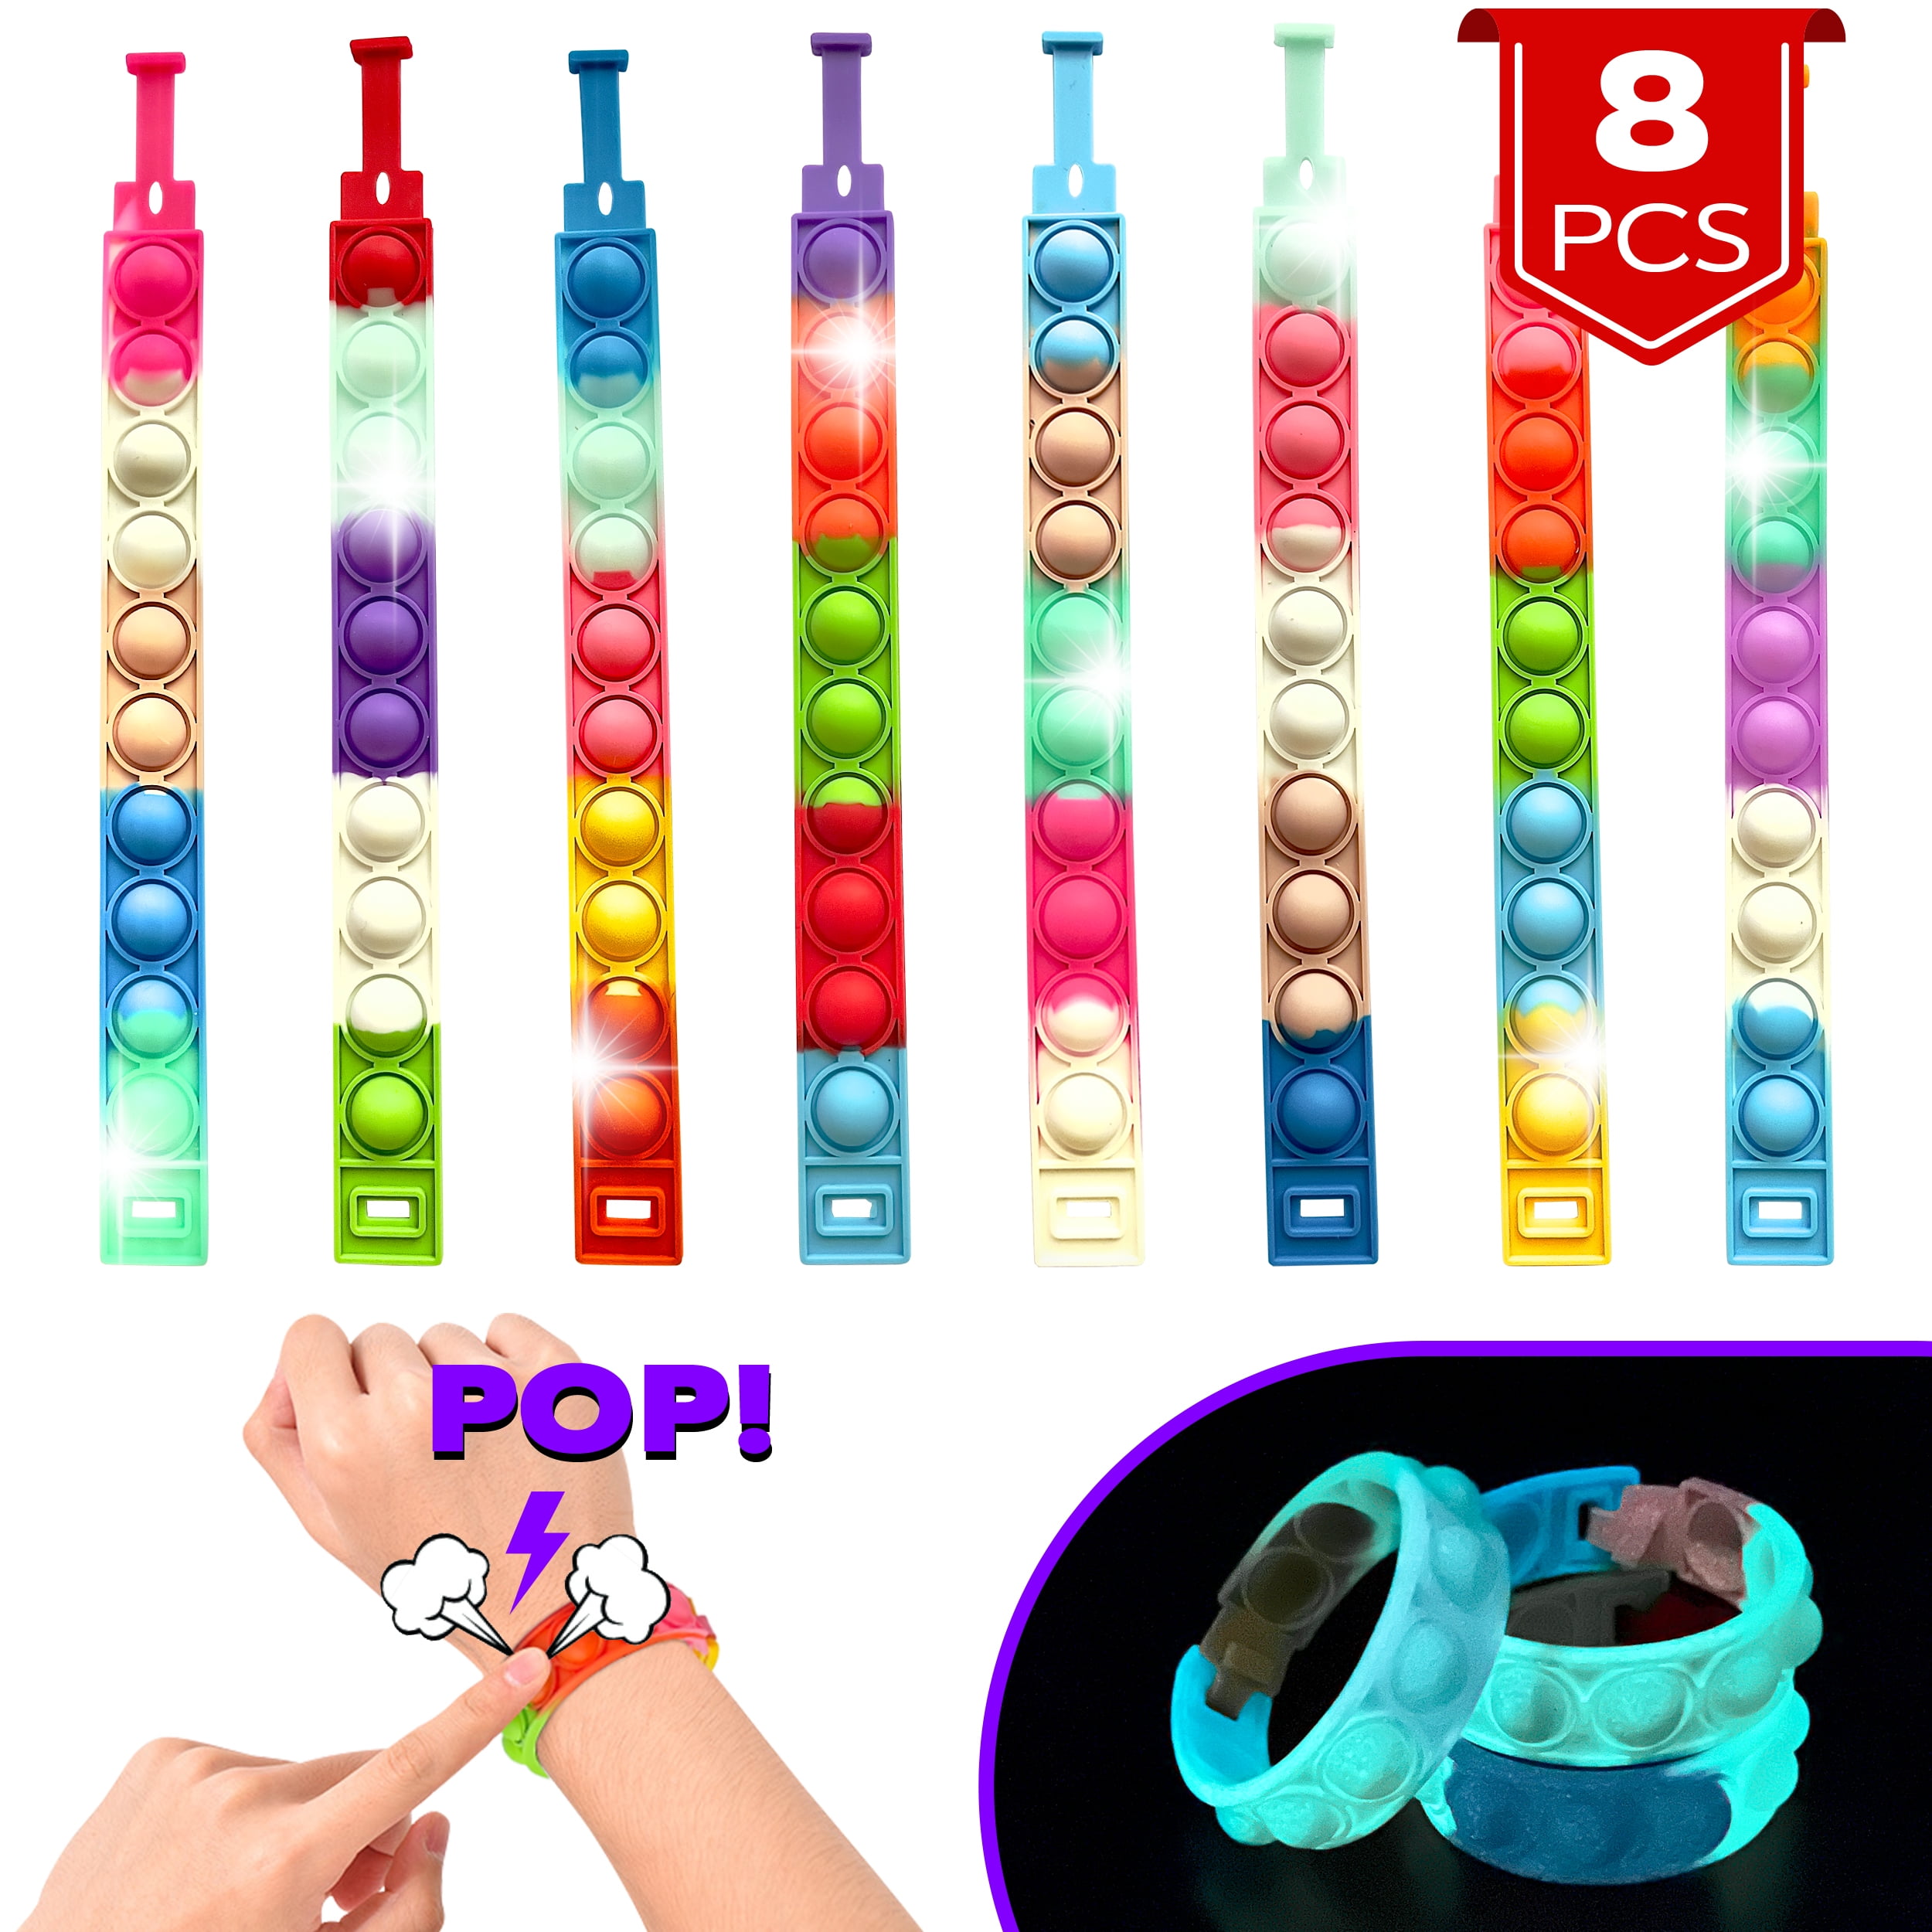  Pop Bracelet Set of 15 by Tilcare Chew Chew - 3D Pop Wristbands  for Kids and Adults with Autism- Food Grade Silicone Sensory Fidget Toy  Bracelets for Toddlers - Washable and